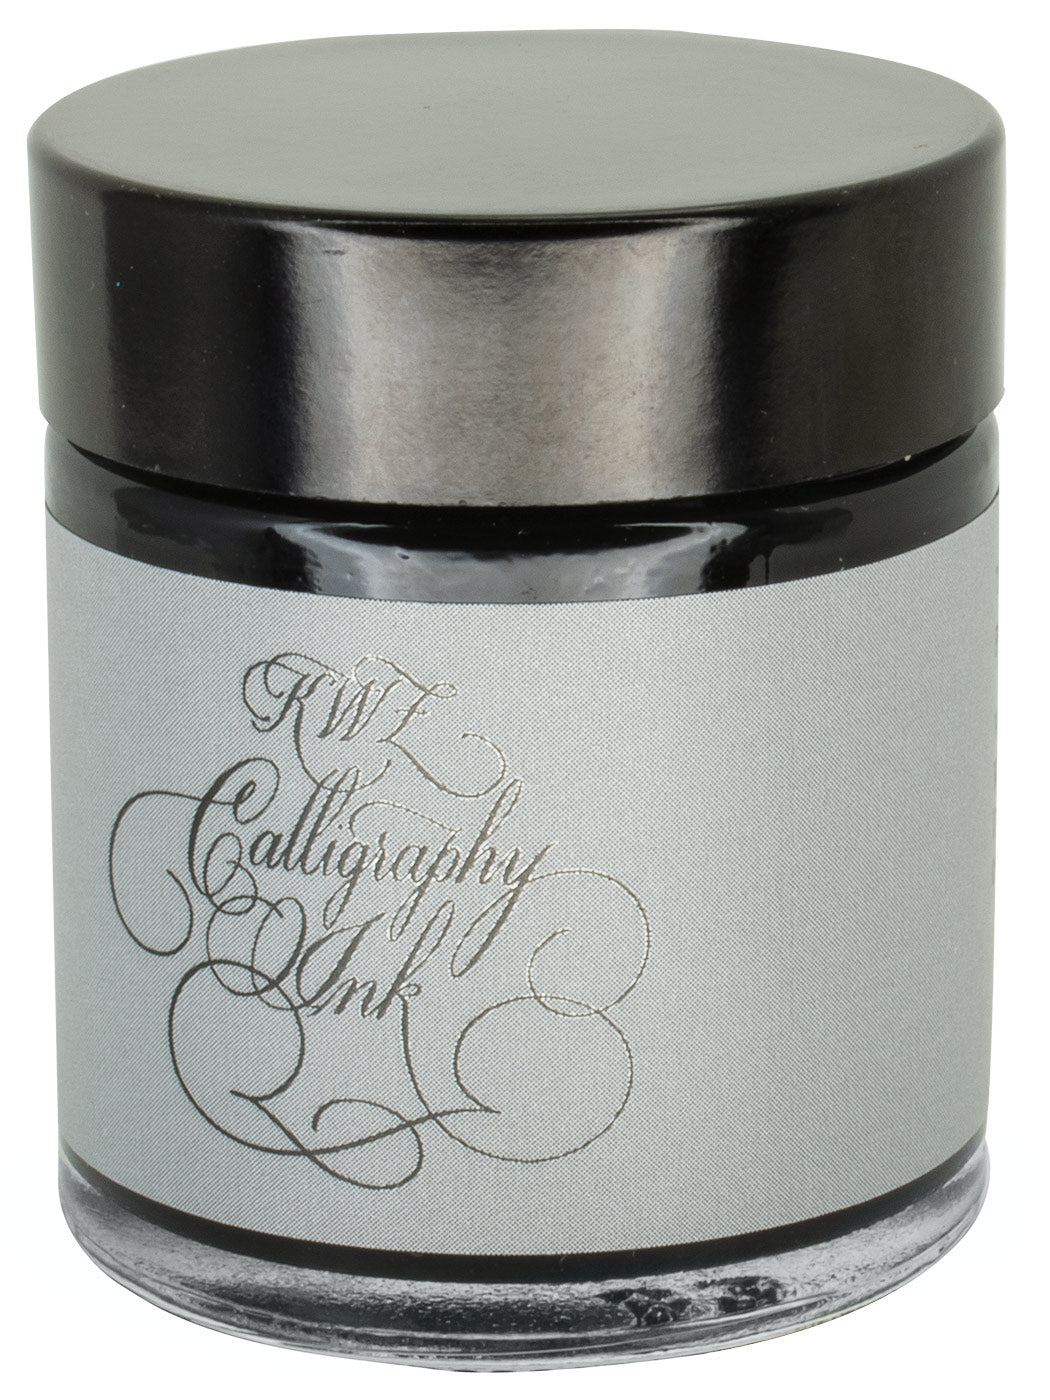 KWZ Calligraphy Ink 25ml - Pearl Blue